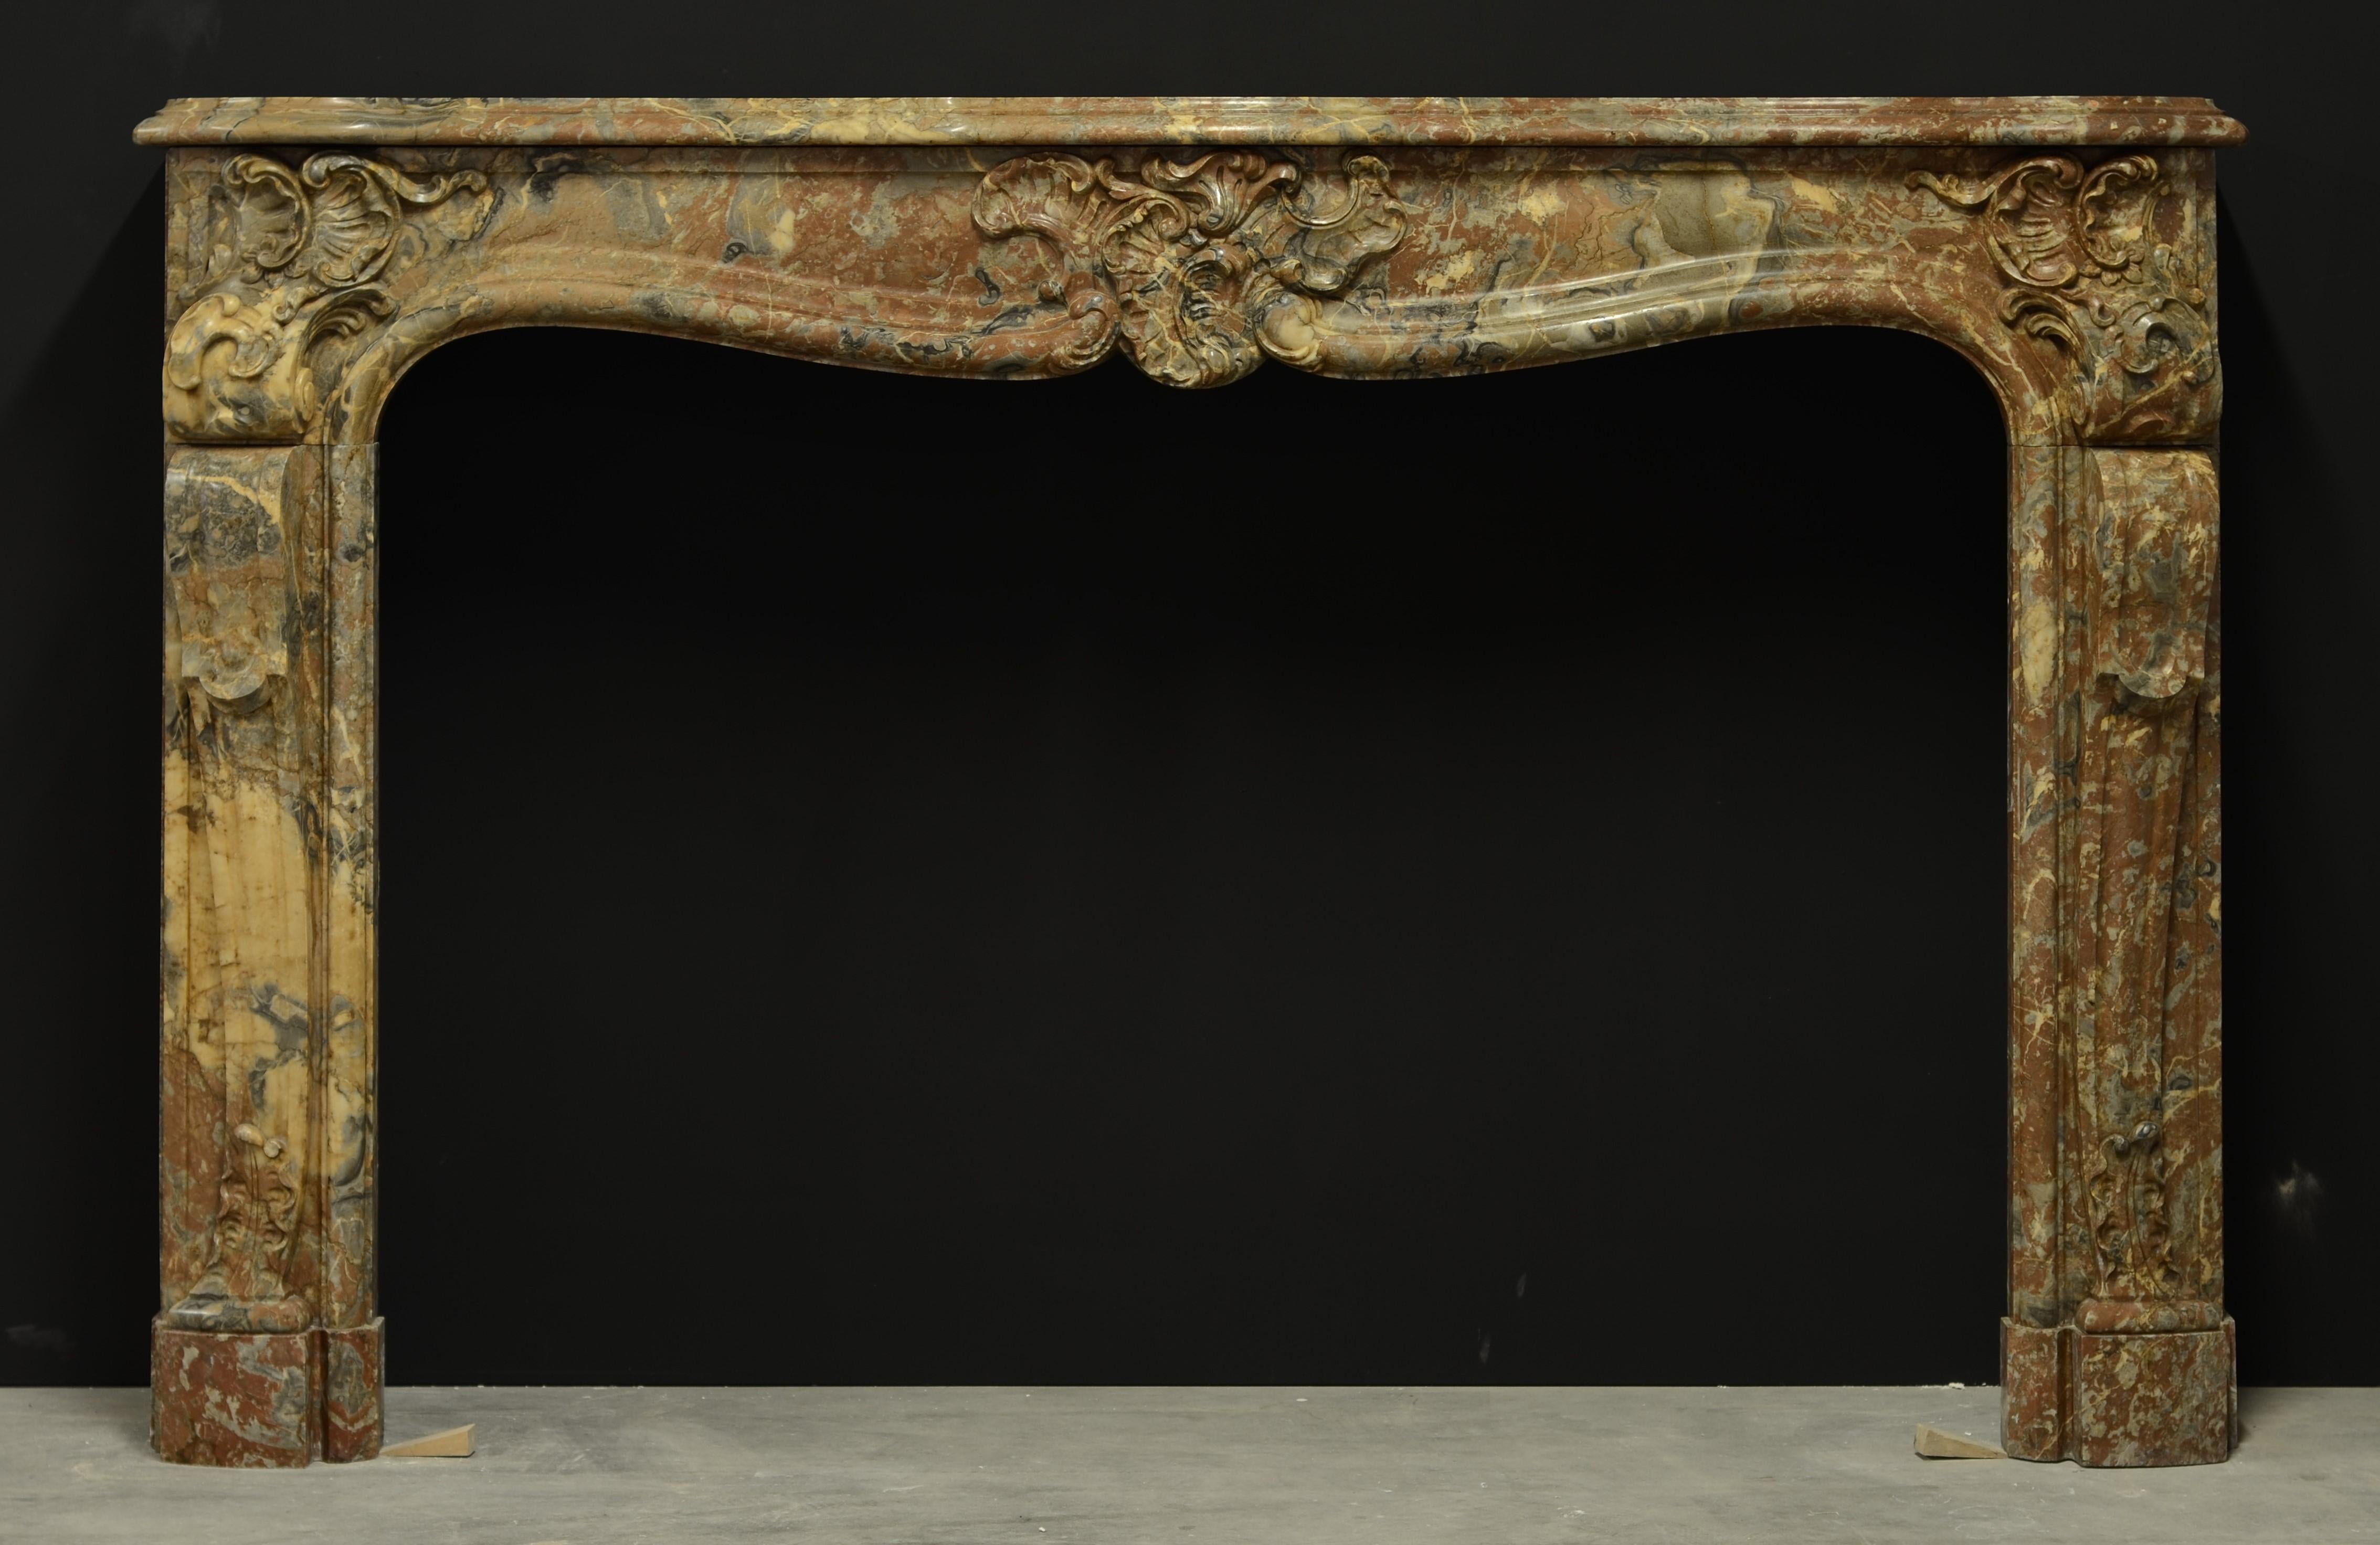 Stunning French marble Louis XV fireplace mantel.

This late 18th century Louis XV French mantel is executed in beautiful 